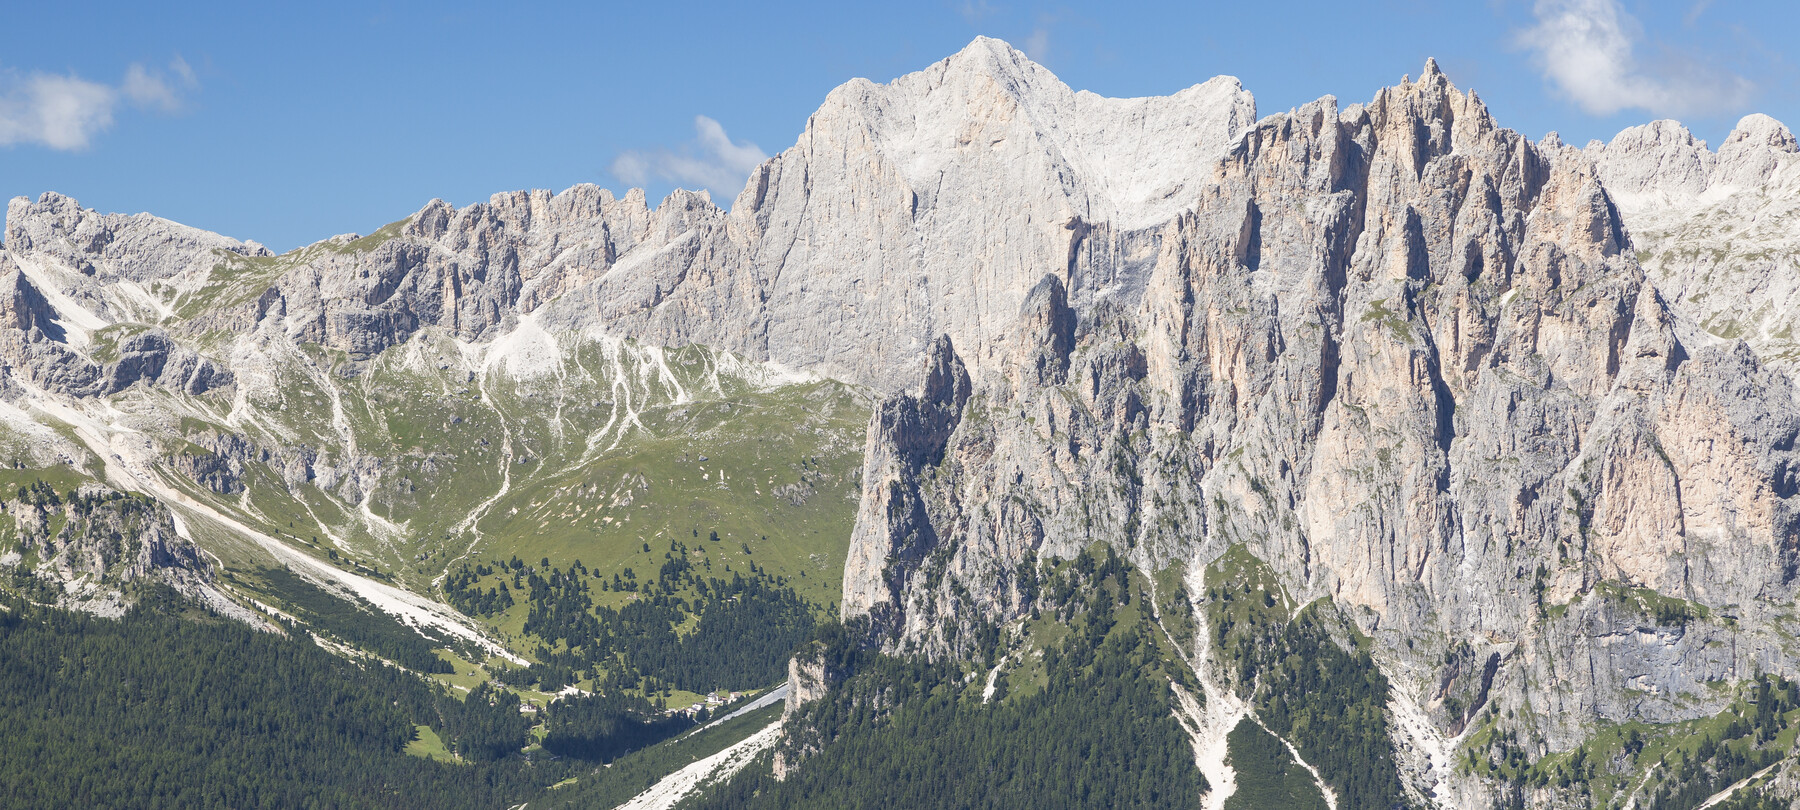 Legends of the Dolomites: King Laurin and enrosadira